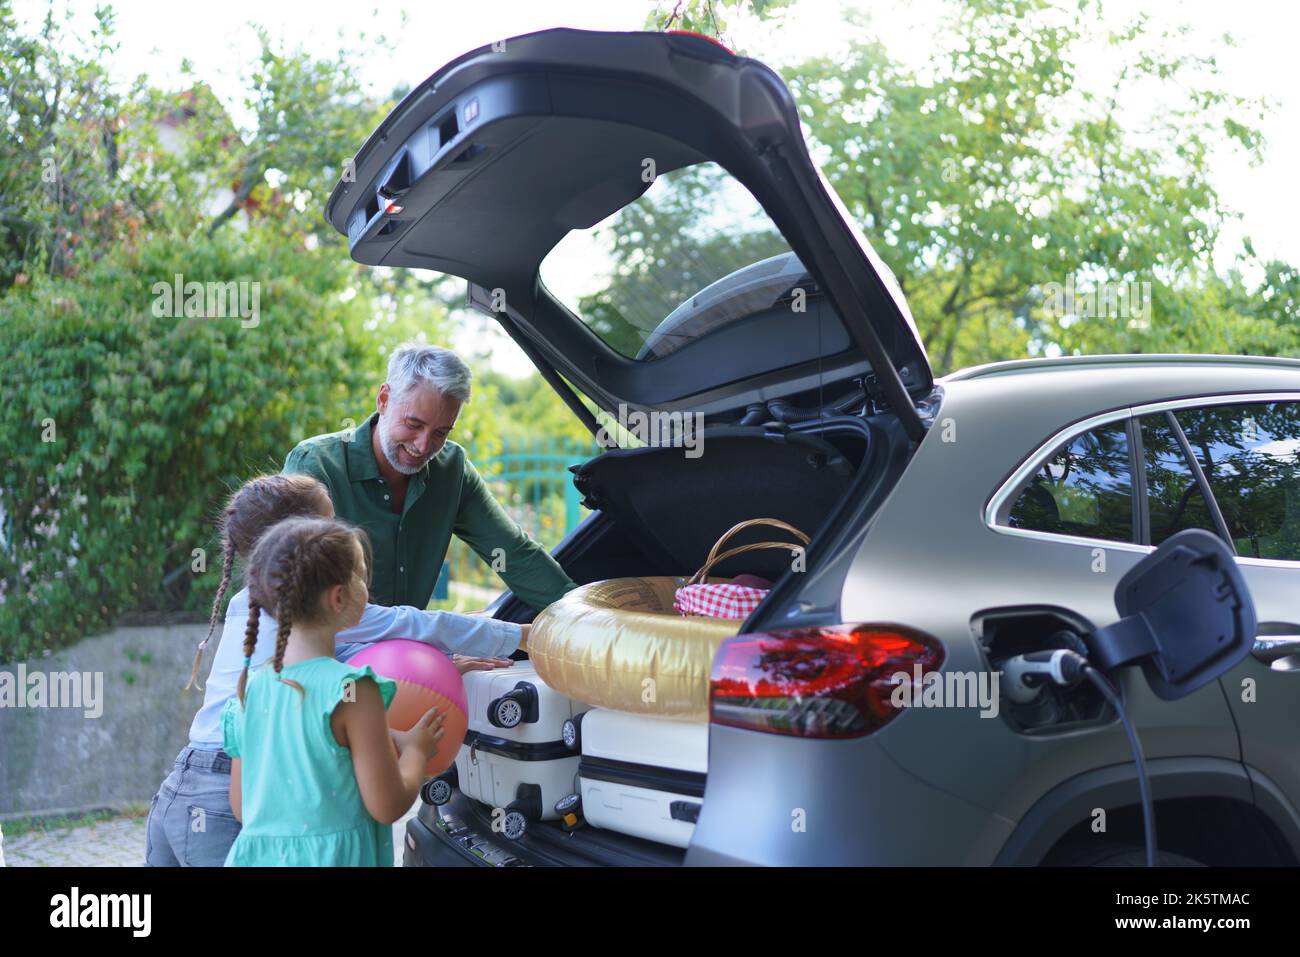 Family with little children loading car and waiting for charging car before going on picnic. Stock Photo